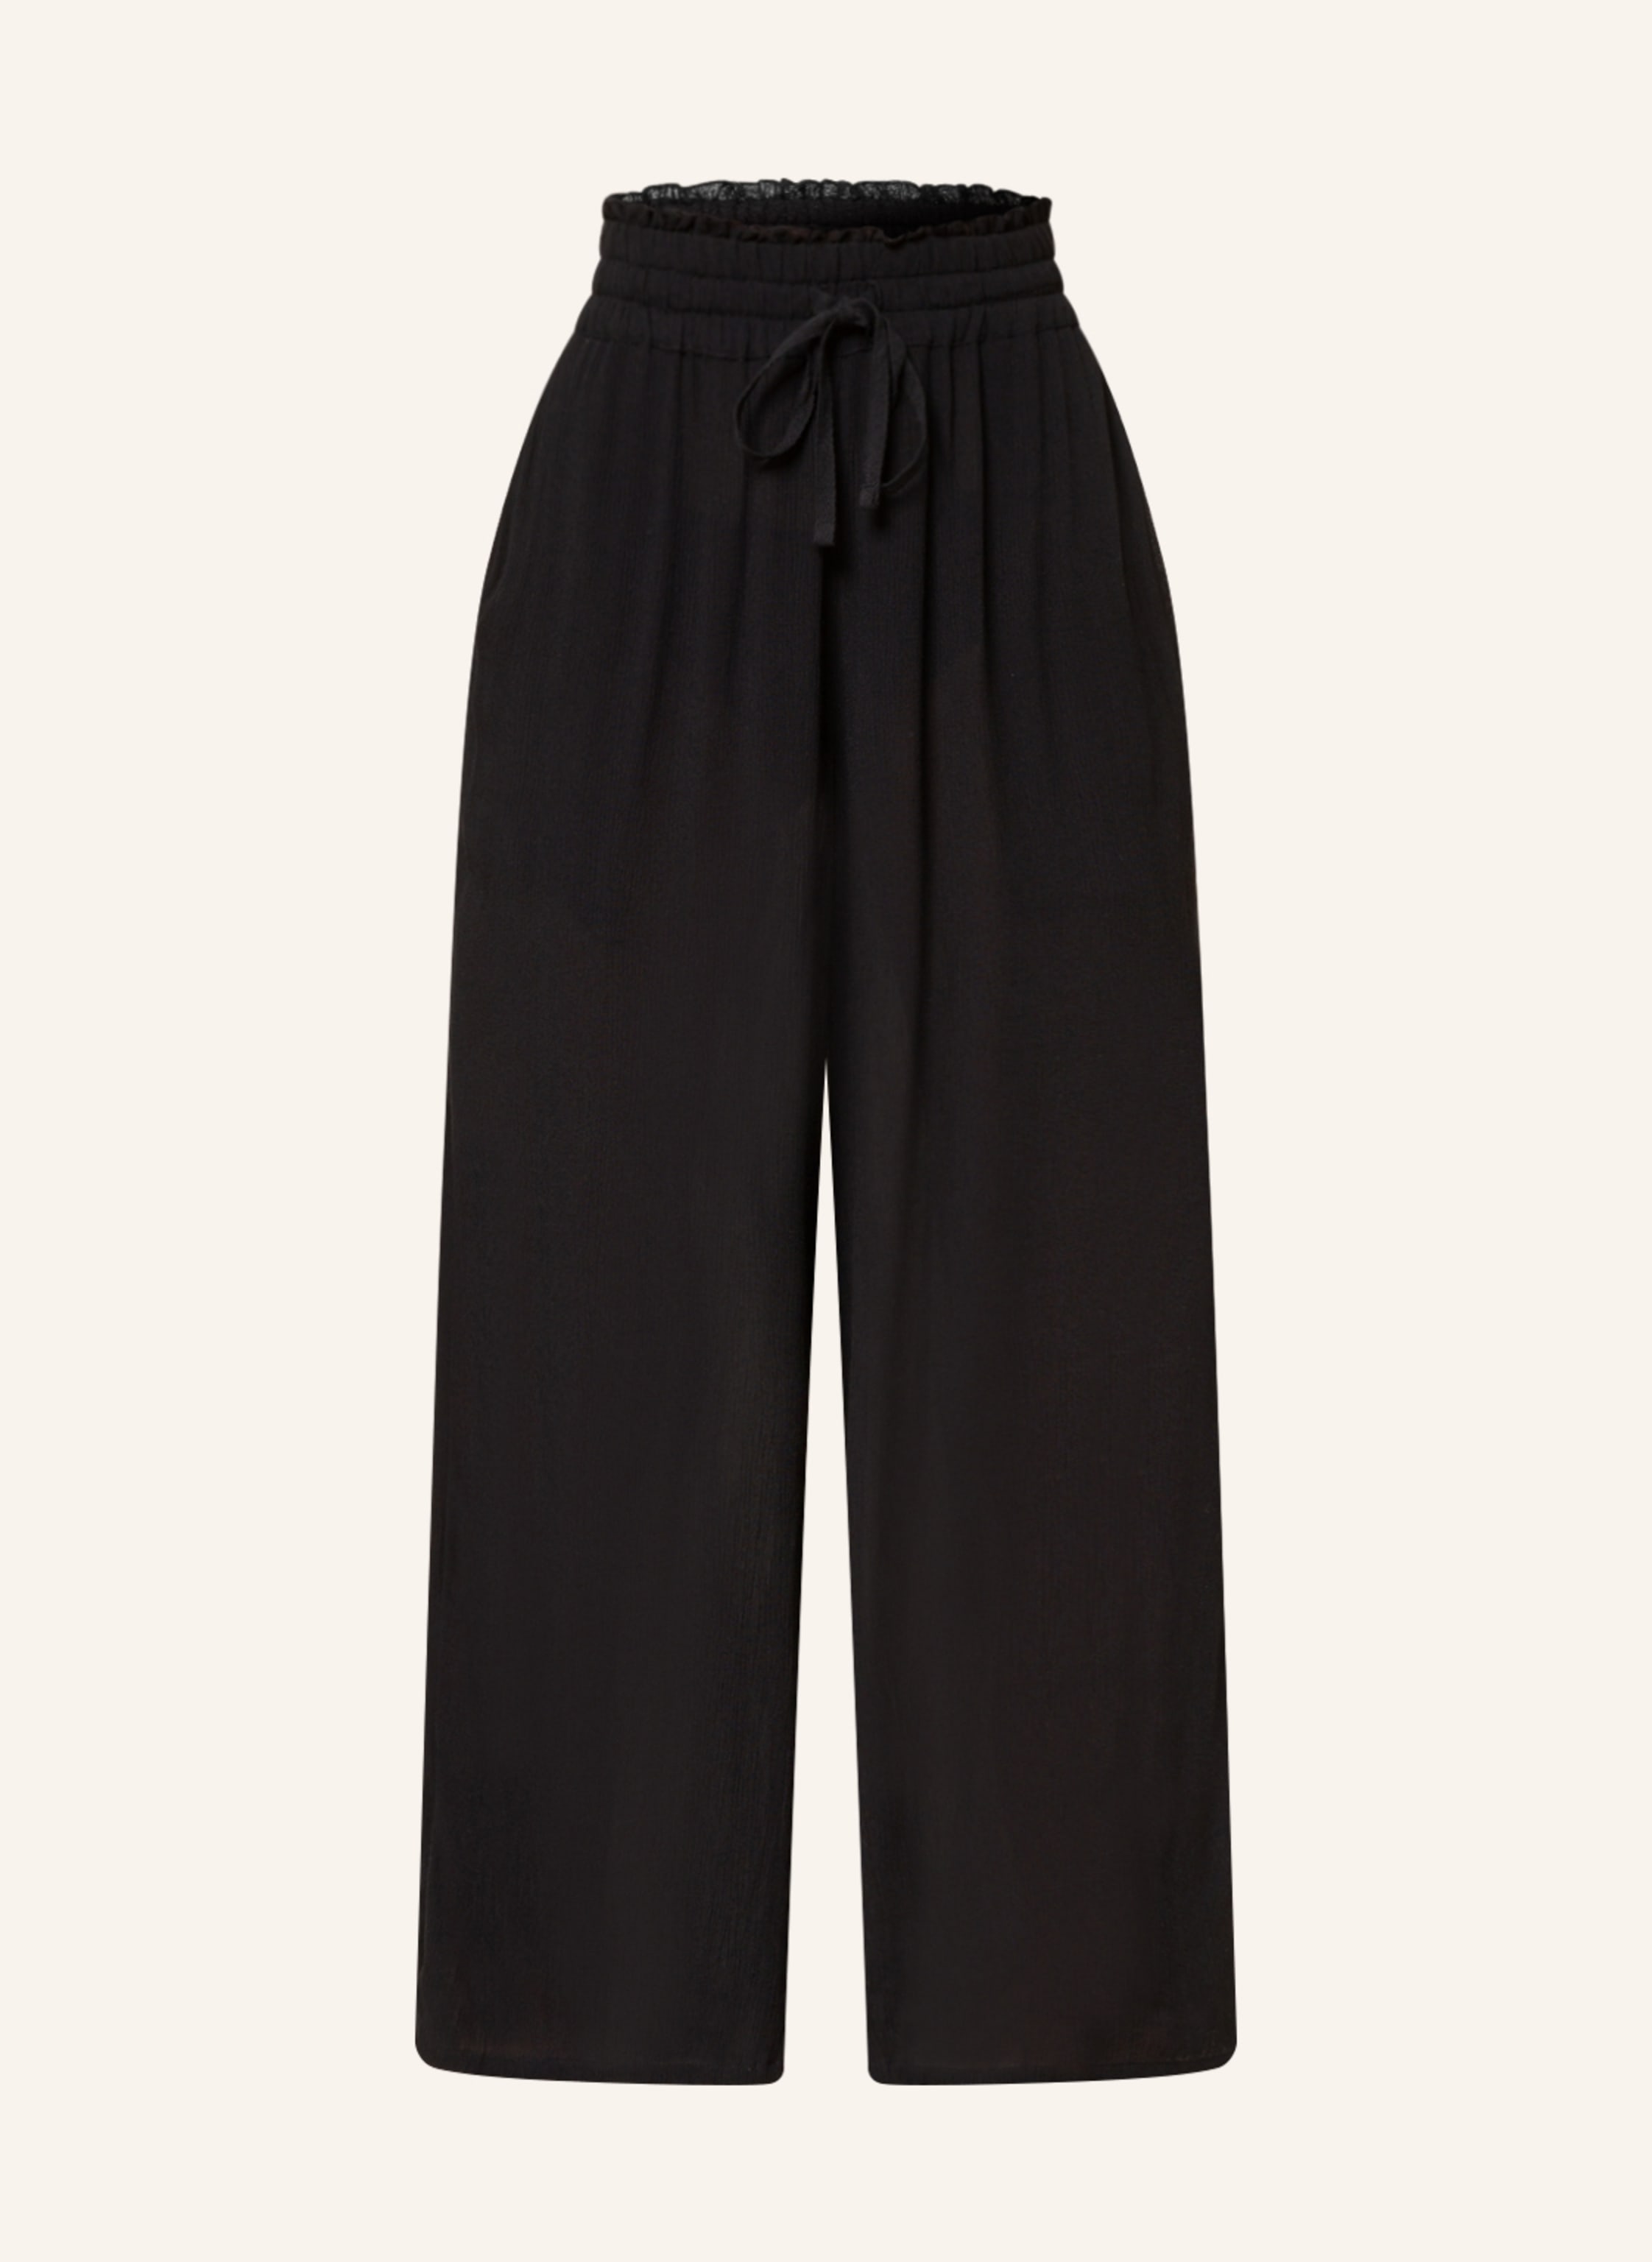 WHISTLES Culottes IMOGEN in black